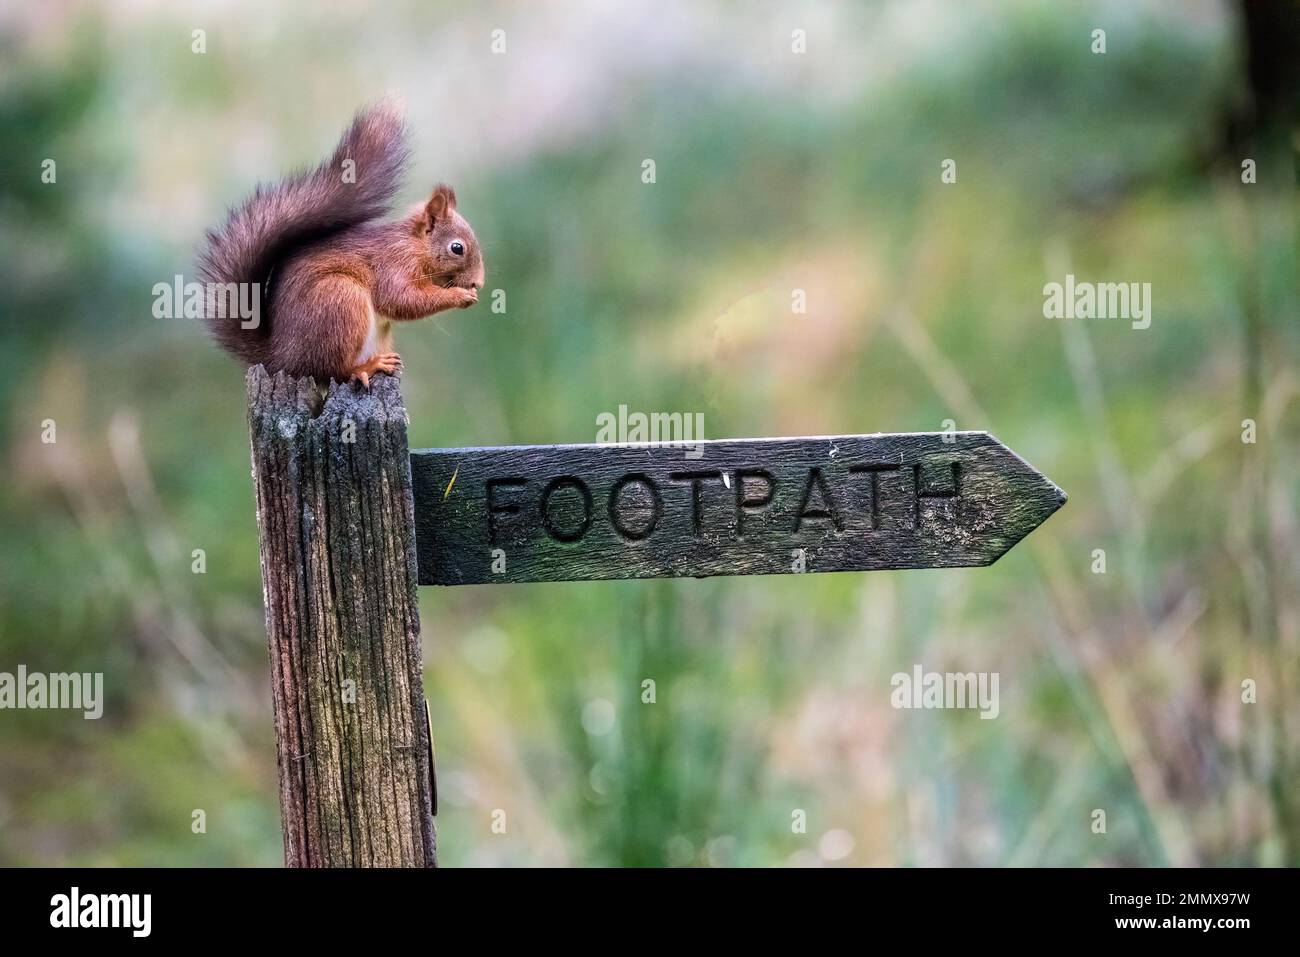 Squirrel munching a nut, perched on a public signpost for a Footpath, in Yorkshire, England. Stock Photo